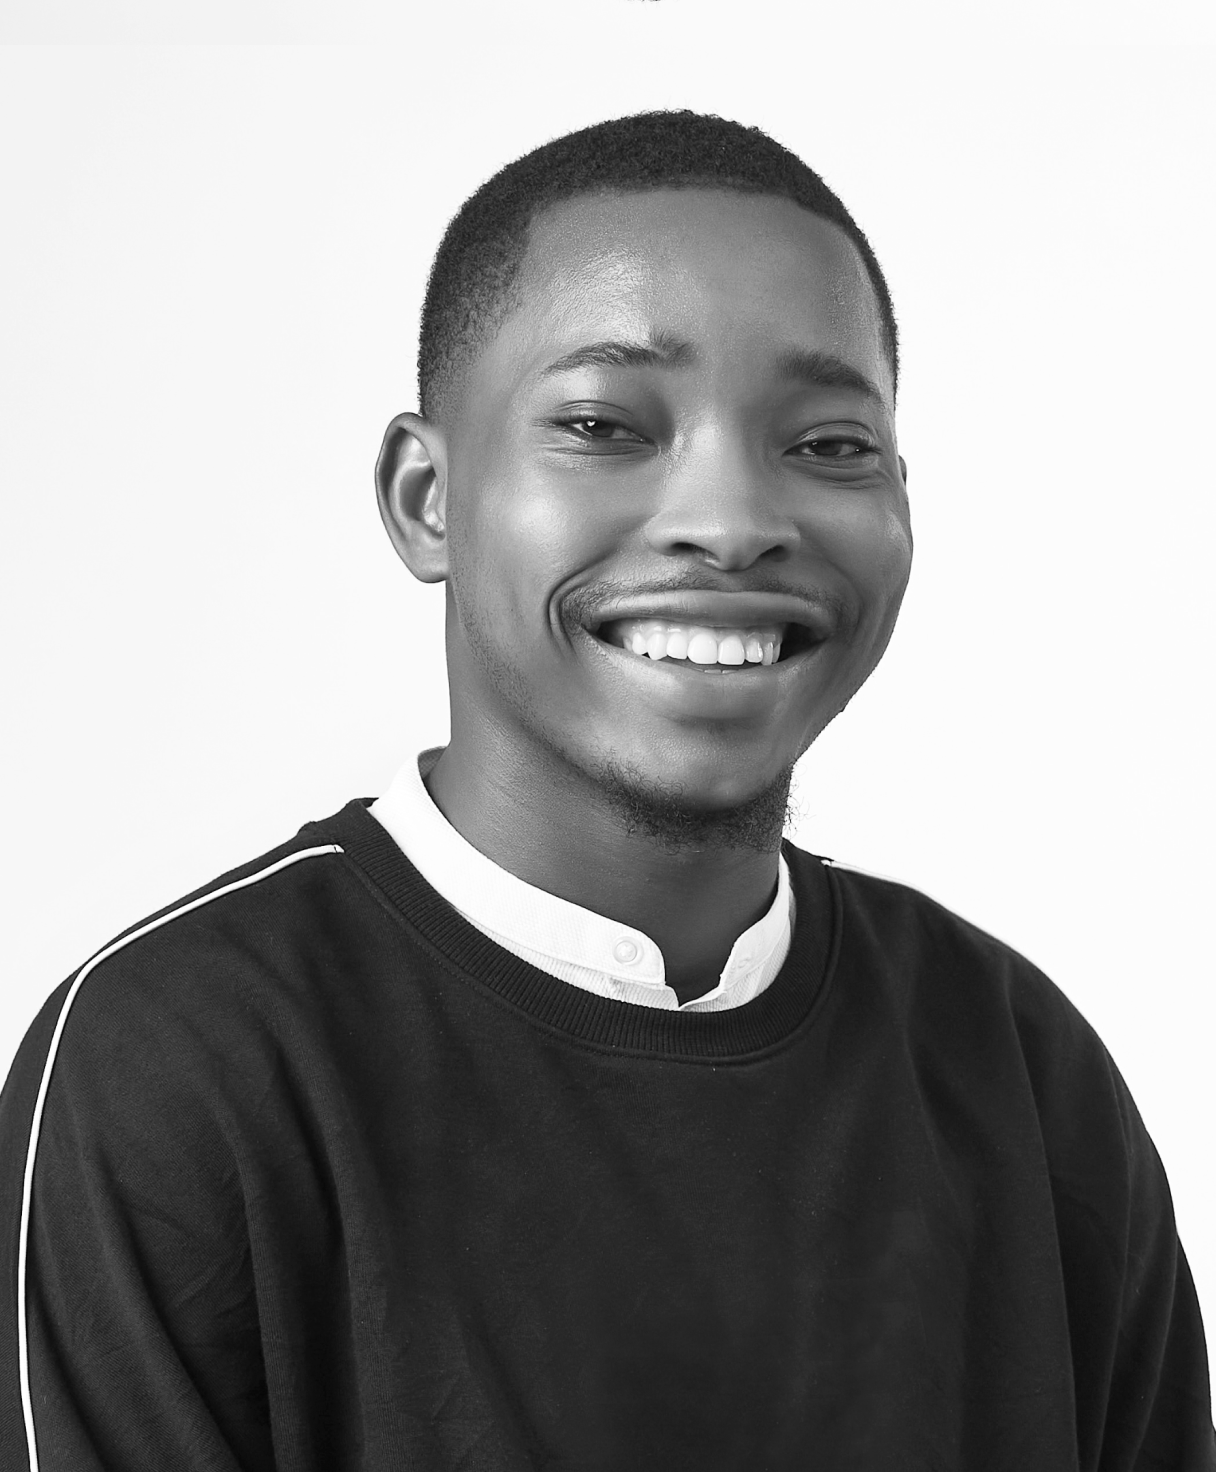 Black and white portrait of BASHIR KAREEM as part of the Oshinowo Studio team picture